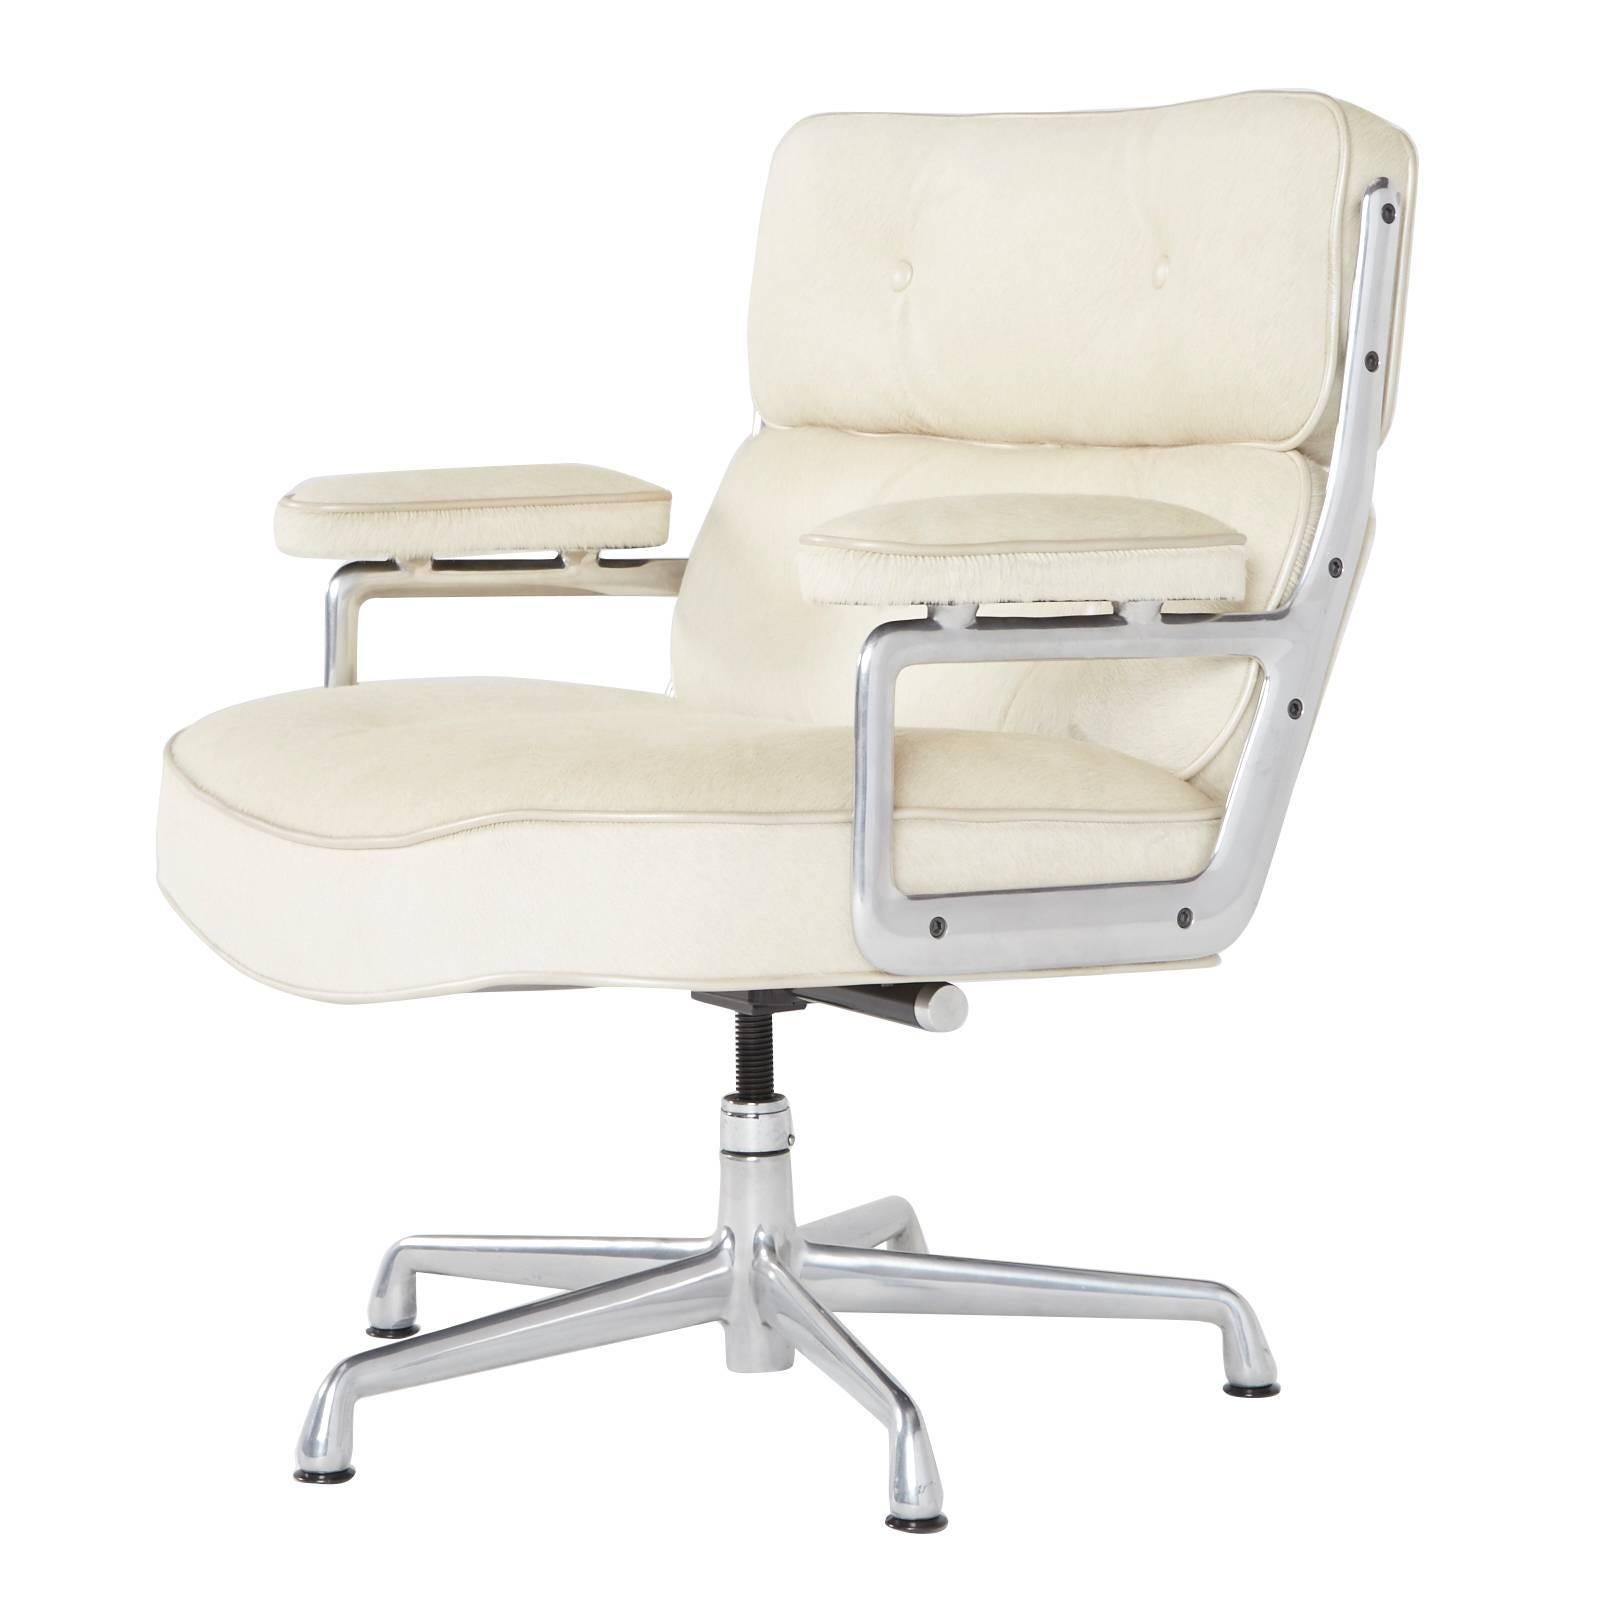 Hair-on Hide Time Life Lobby Chairs by Eames for Herman Miller (Only 1 Left)